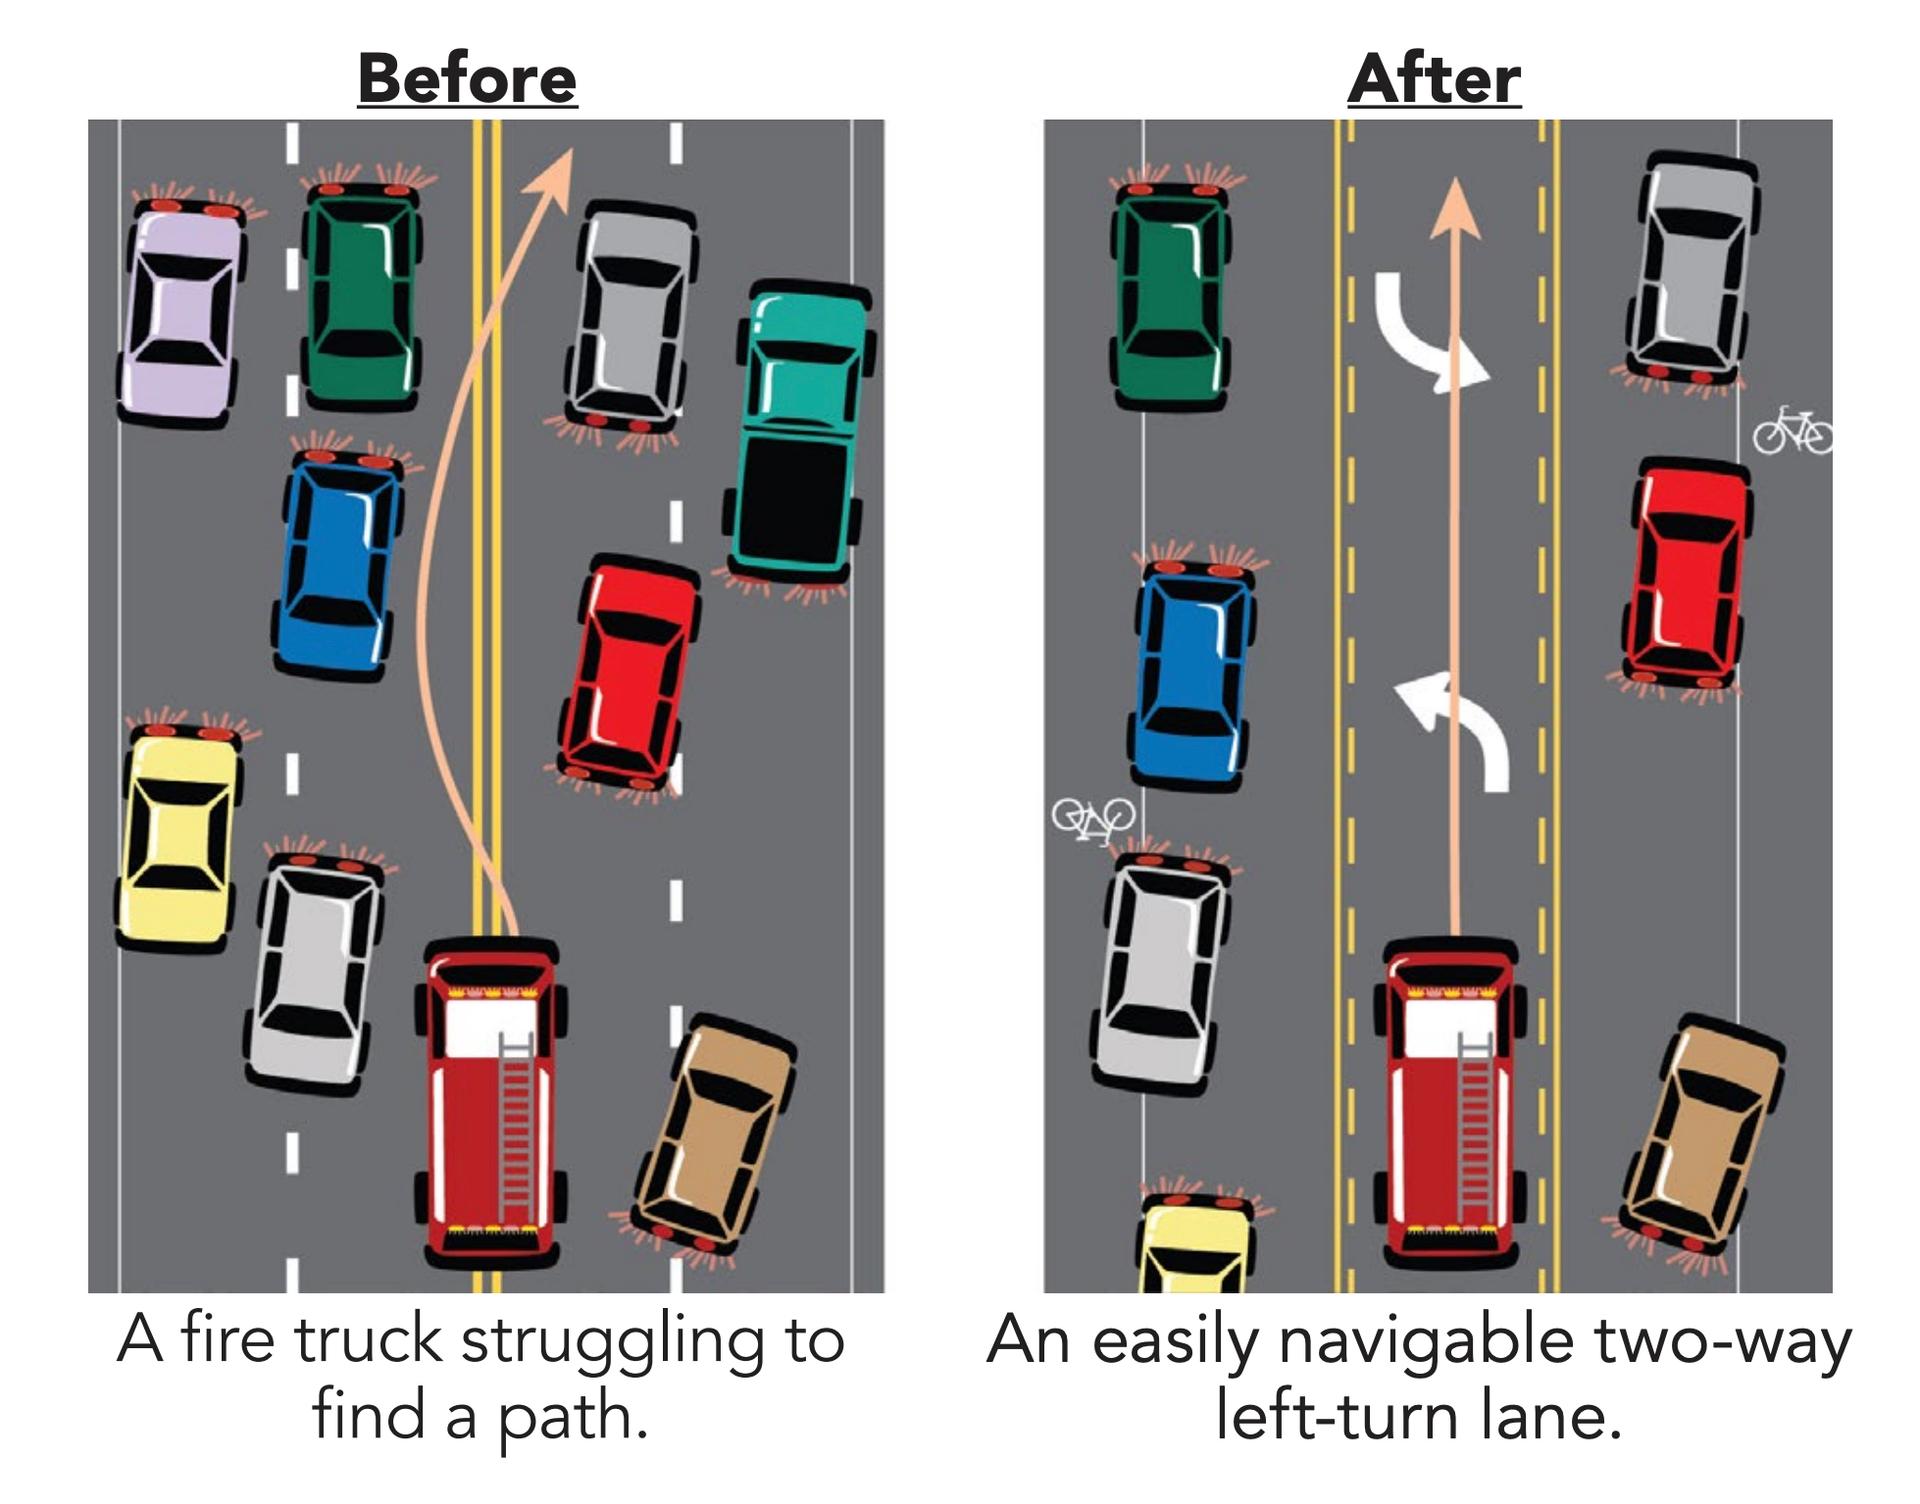 A graphic showing a 4 to 3 lane reconfiguration making it easier for emergency responders